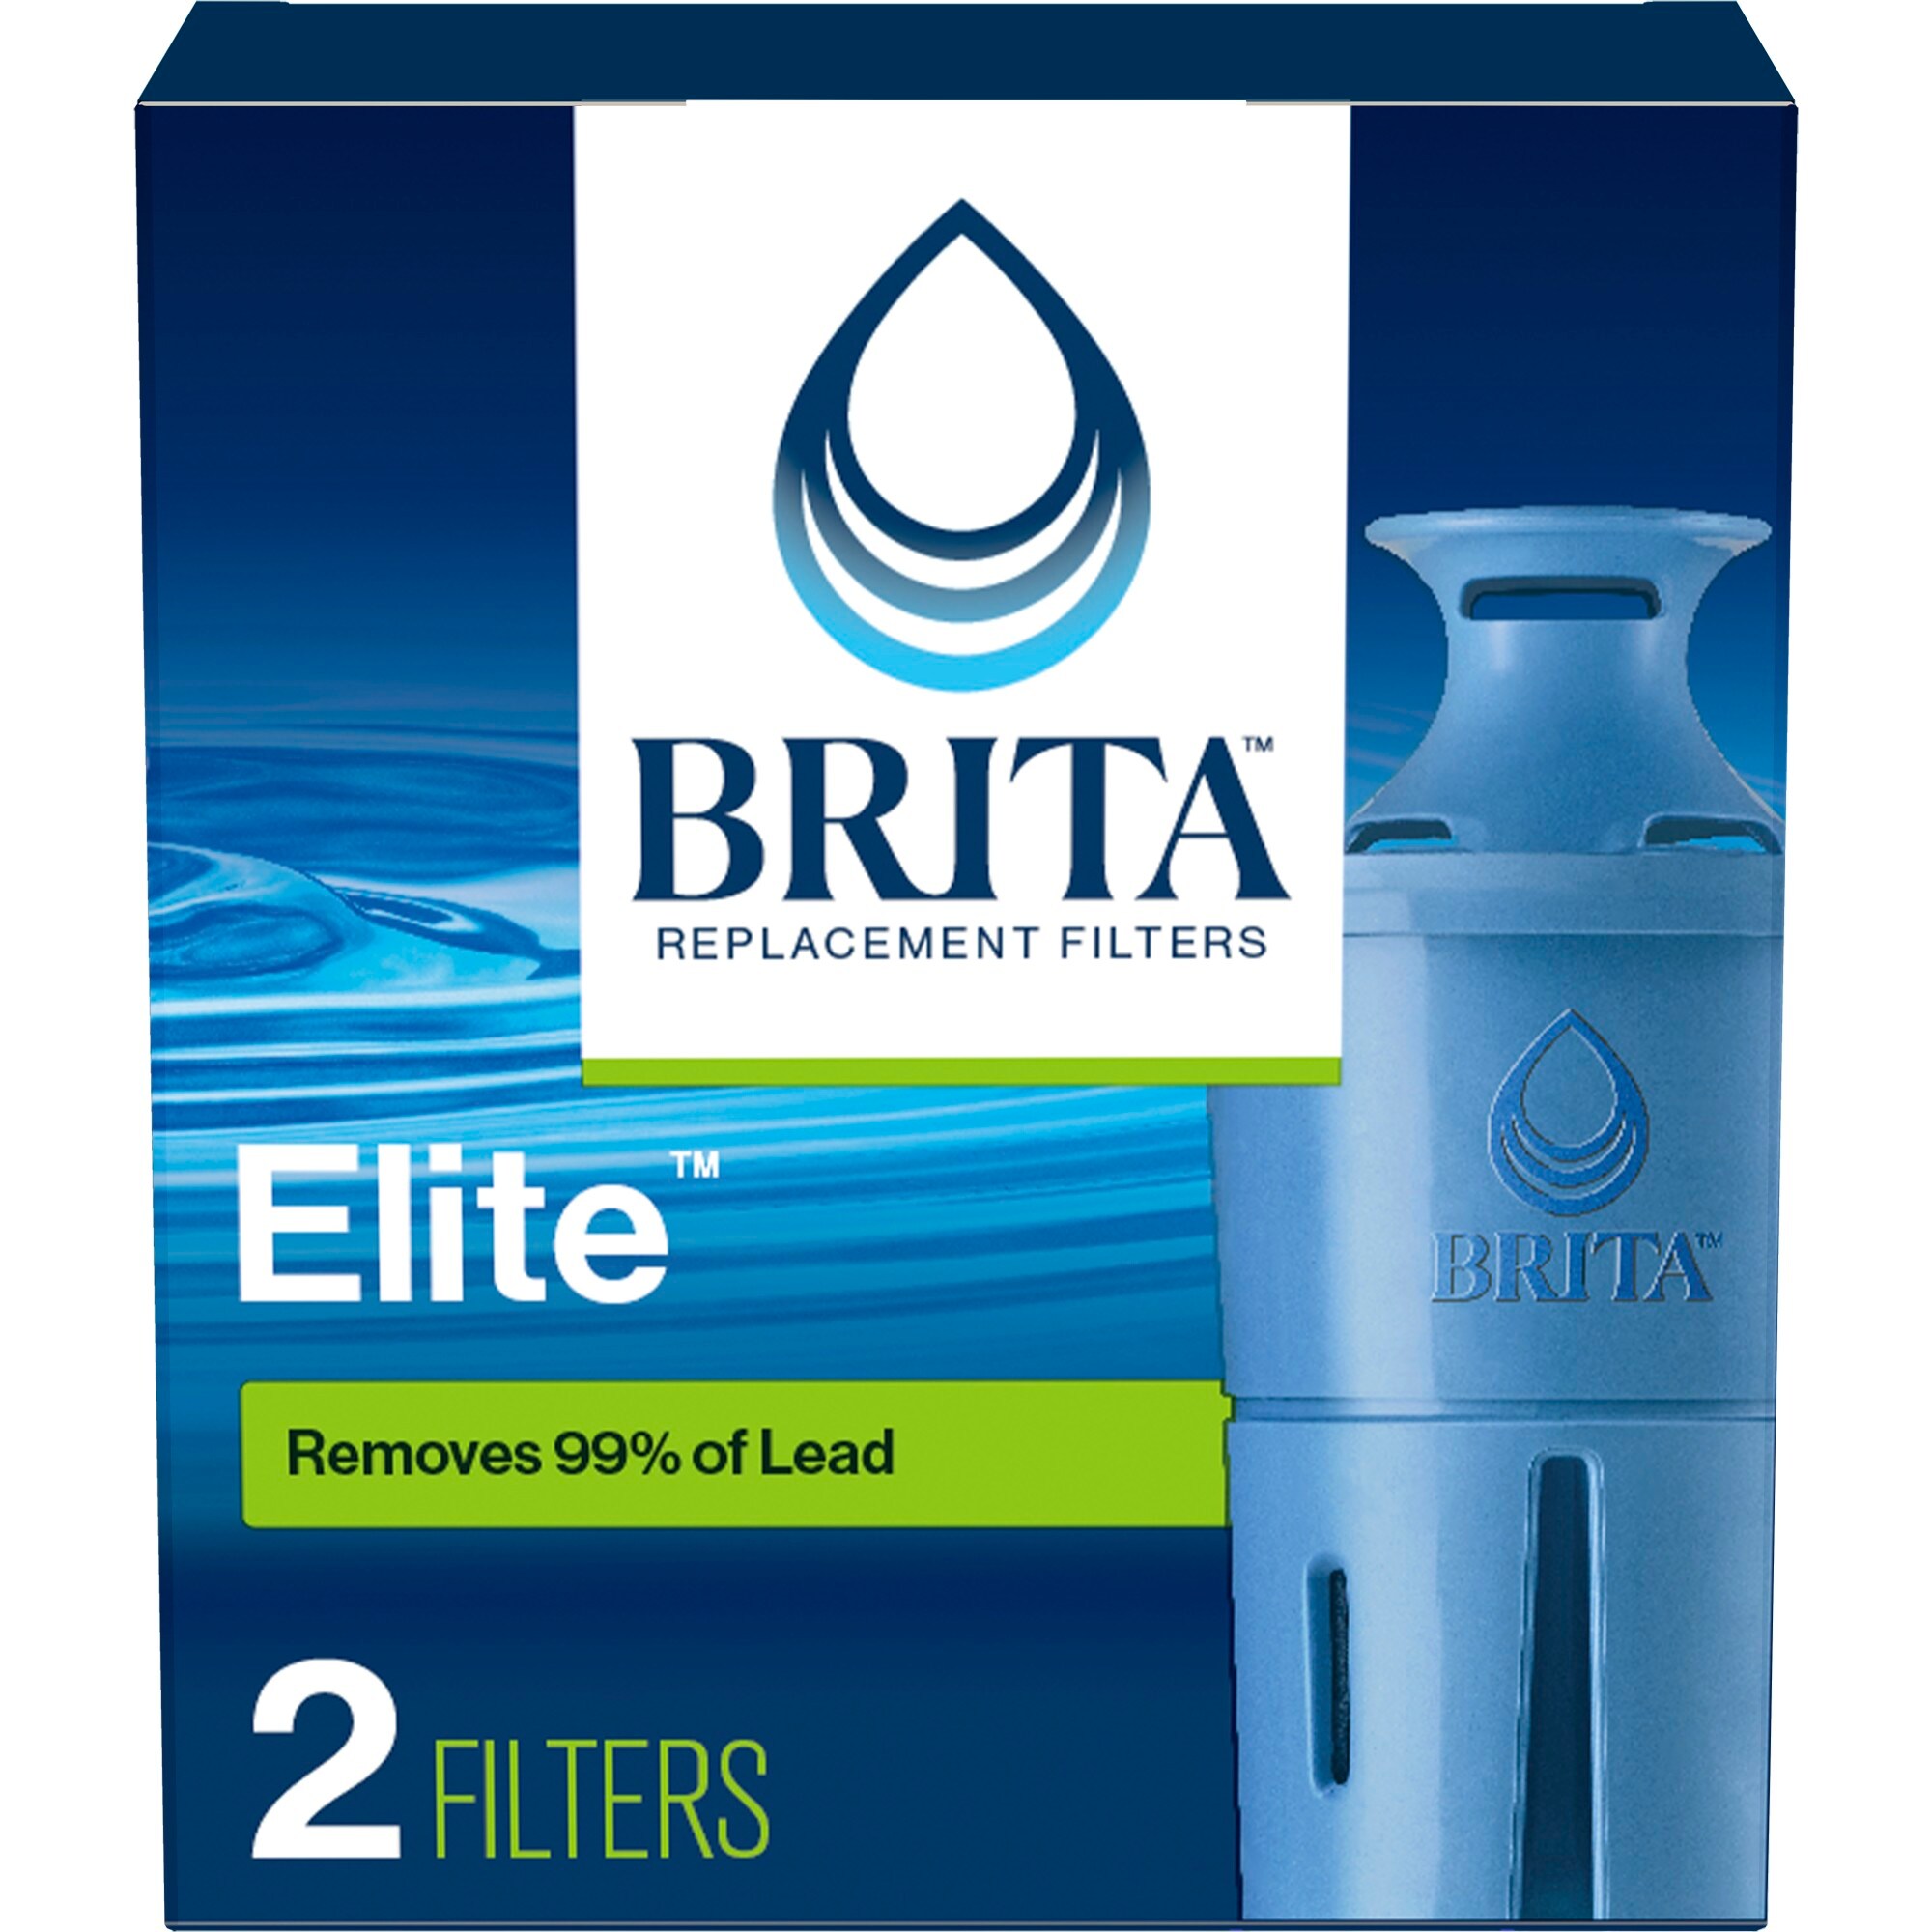 BPA Free PHIG Longlast Water Filter 2 Count Longlast Replacement Filters for Pitcher and Dispensers Reduces Lead 